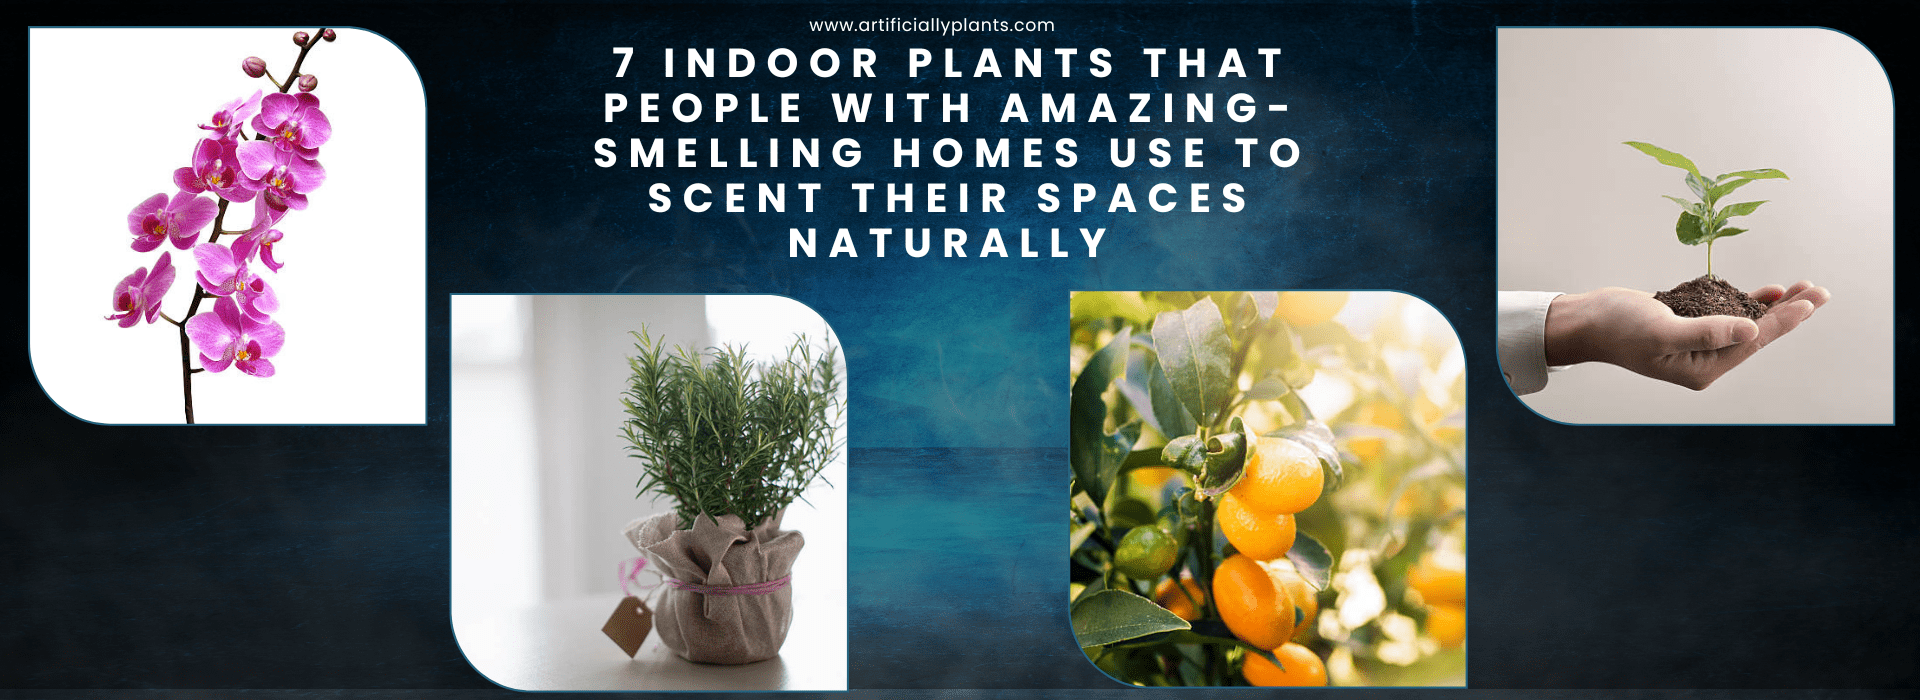 7 indoor plants that people with amazing-smelling homes use to scent their spaces naturally